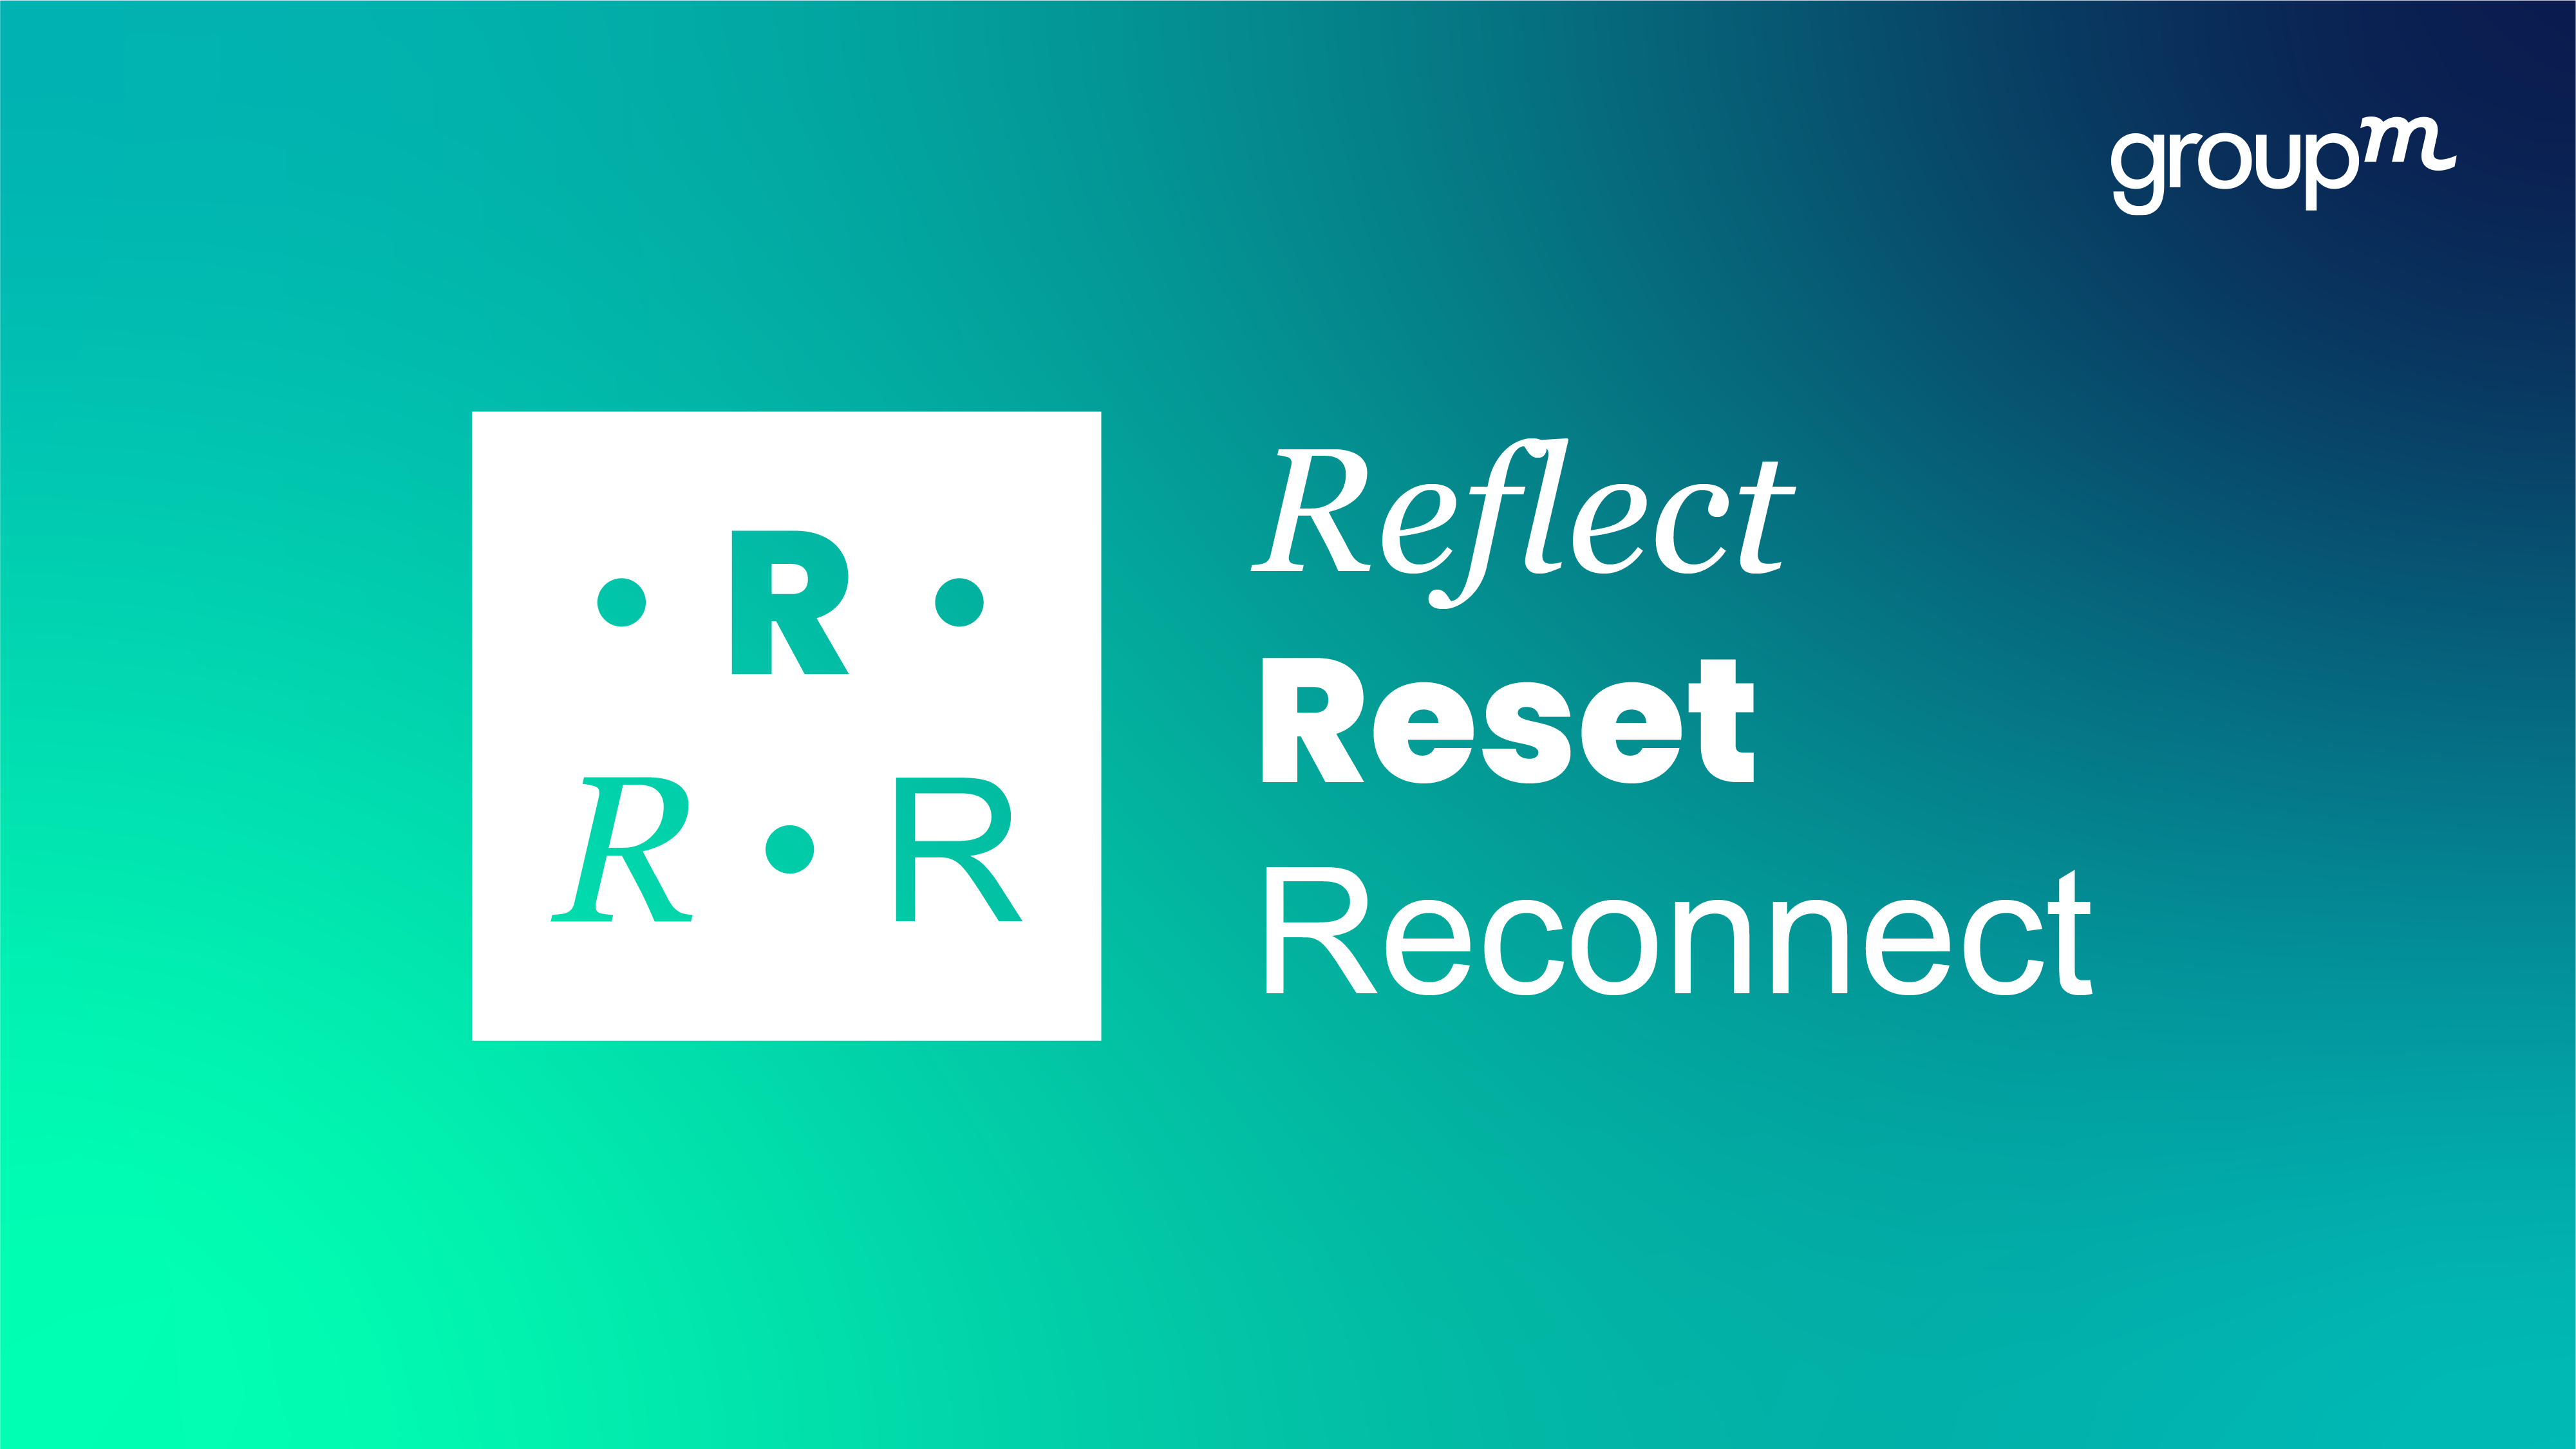 Reflect, Reset, Reconnect